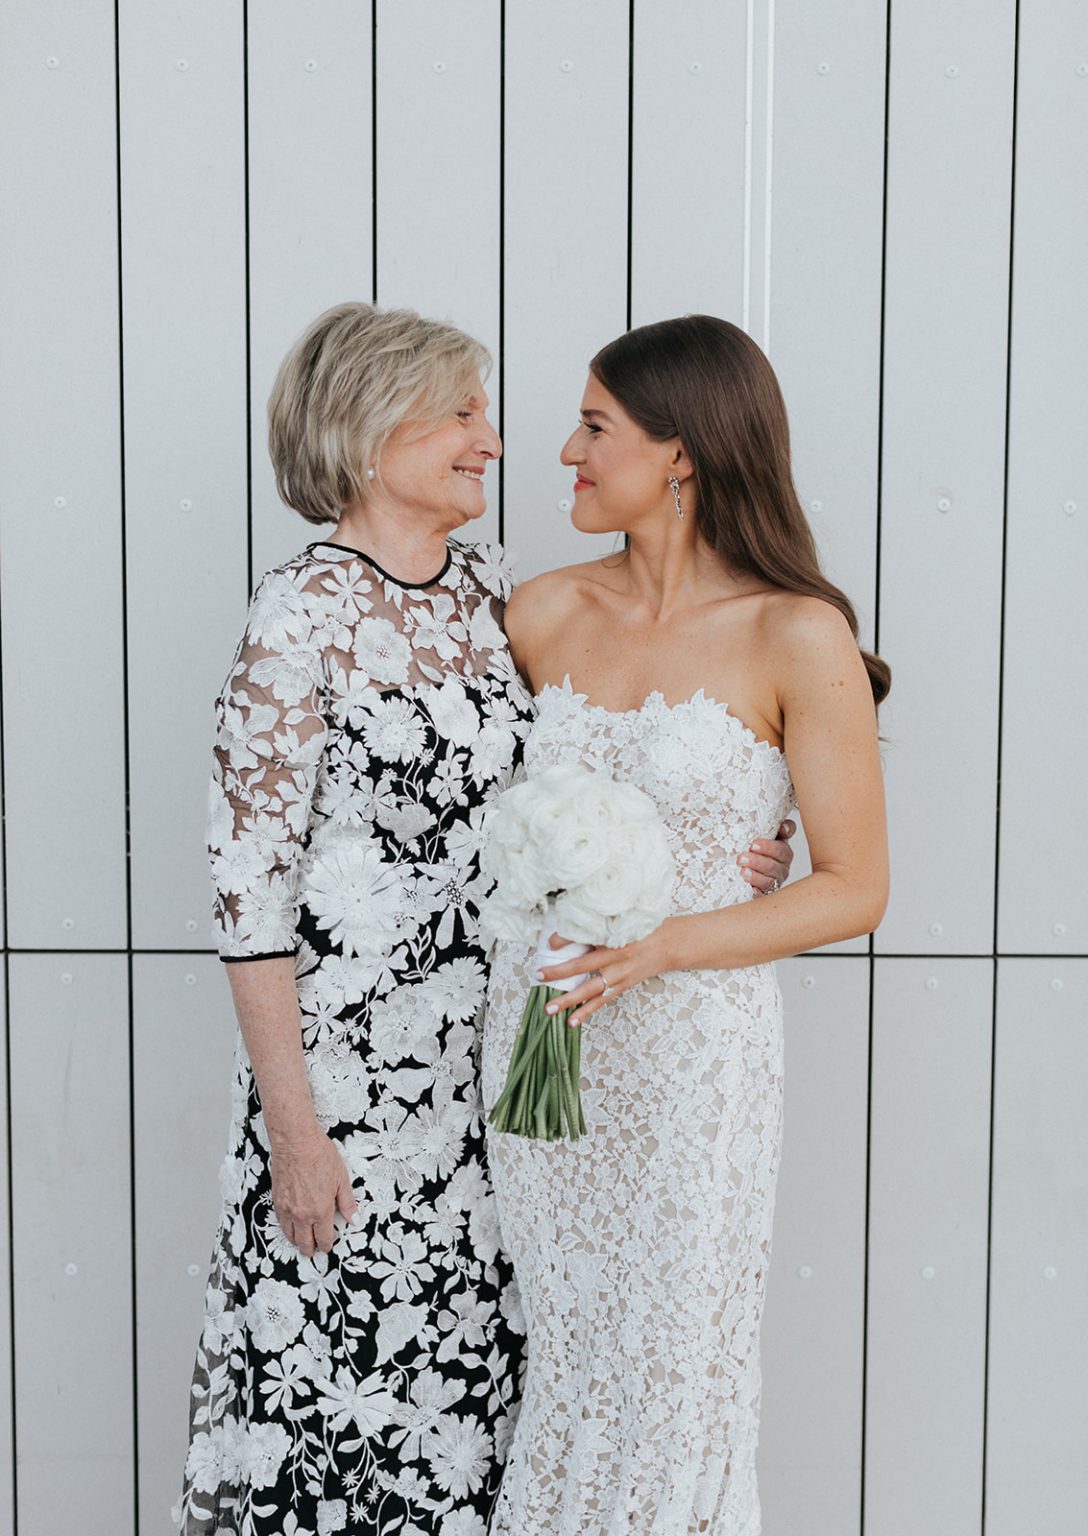 Mom and daughter on wedding day - Photo by Alisha Tova - Mother's Day brunch ideas | Leah E. Moss Designs